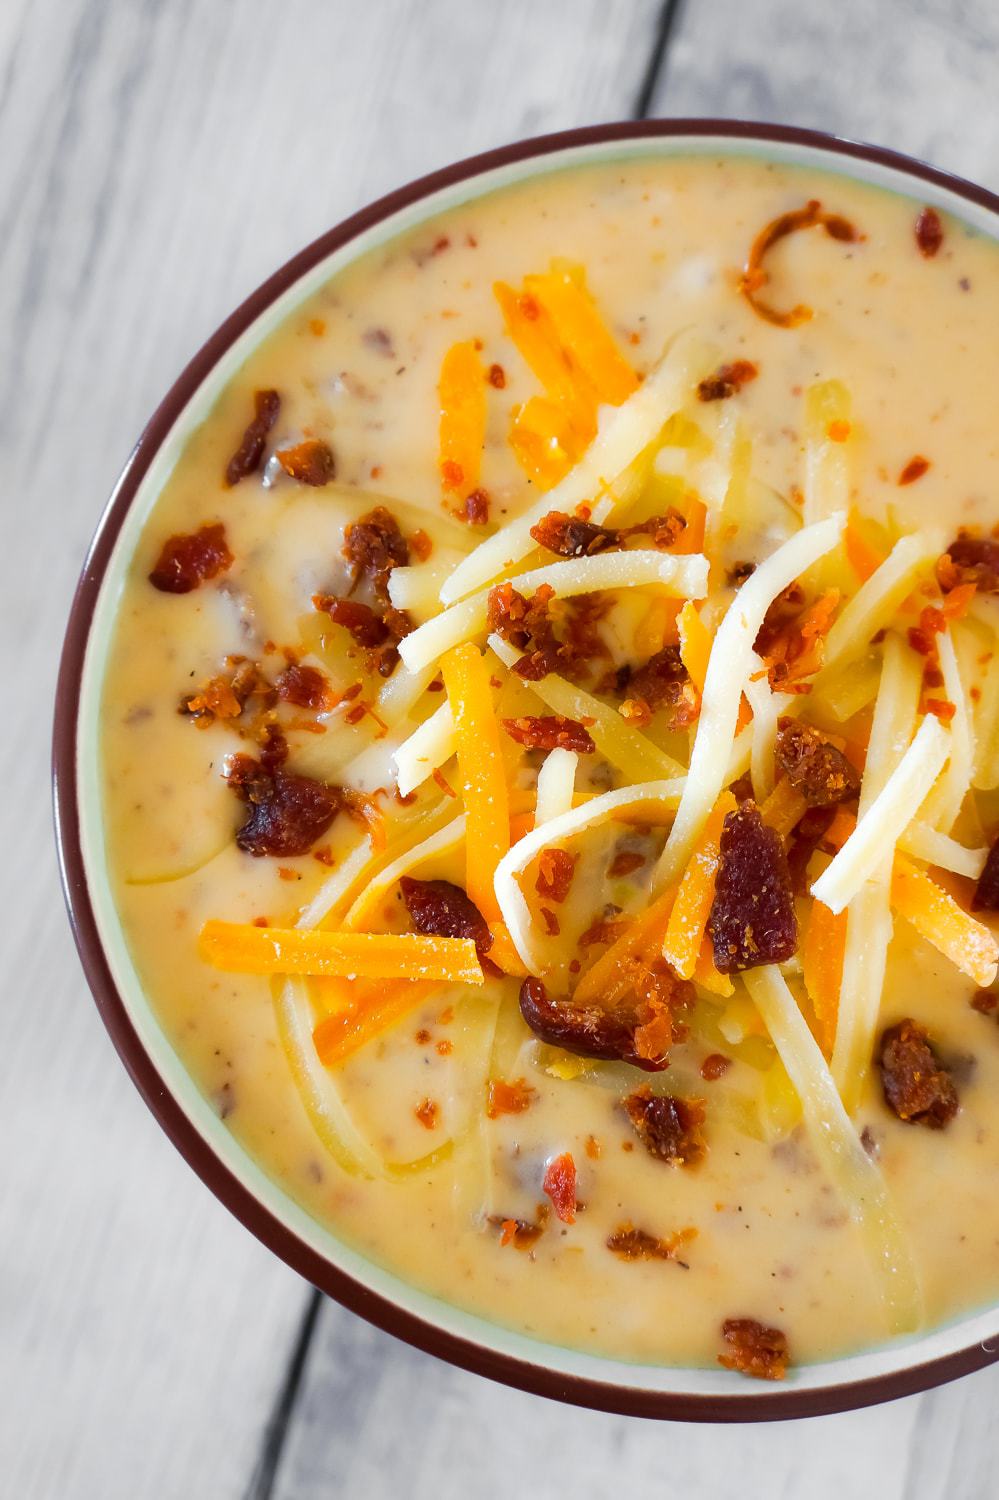 Bacon Cheeseburger Soup is a hearty soup recipe that can be whipped up in just fifteen minutes. This tasty dish made with Campbell's Cream of Bacon soup and Campbell's Cheddar Cheese soup, is loaded with ground beef, real bacon bits and cheddar cheese.